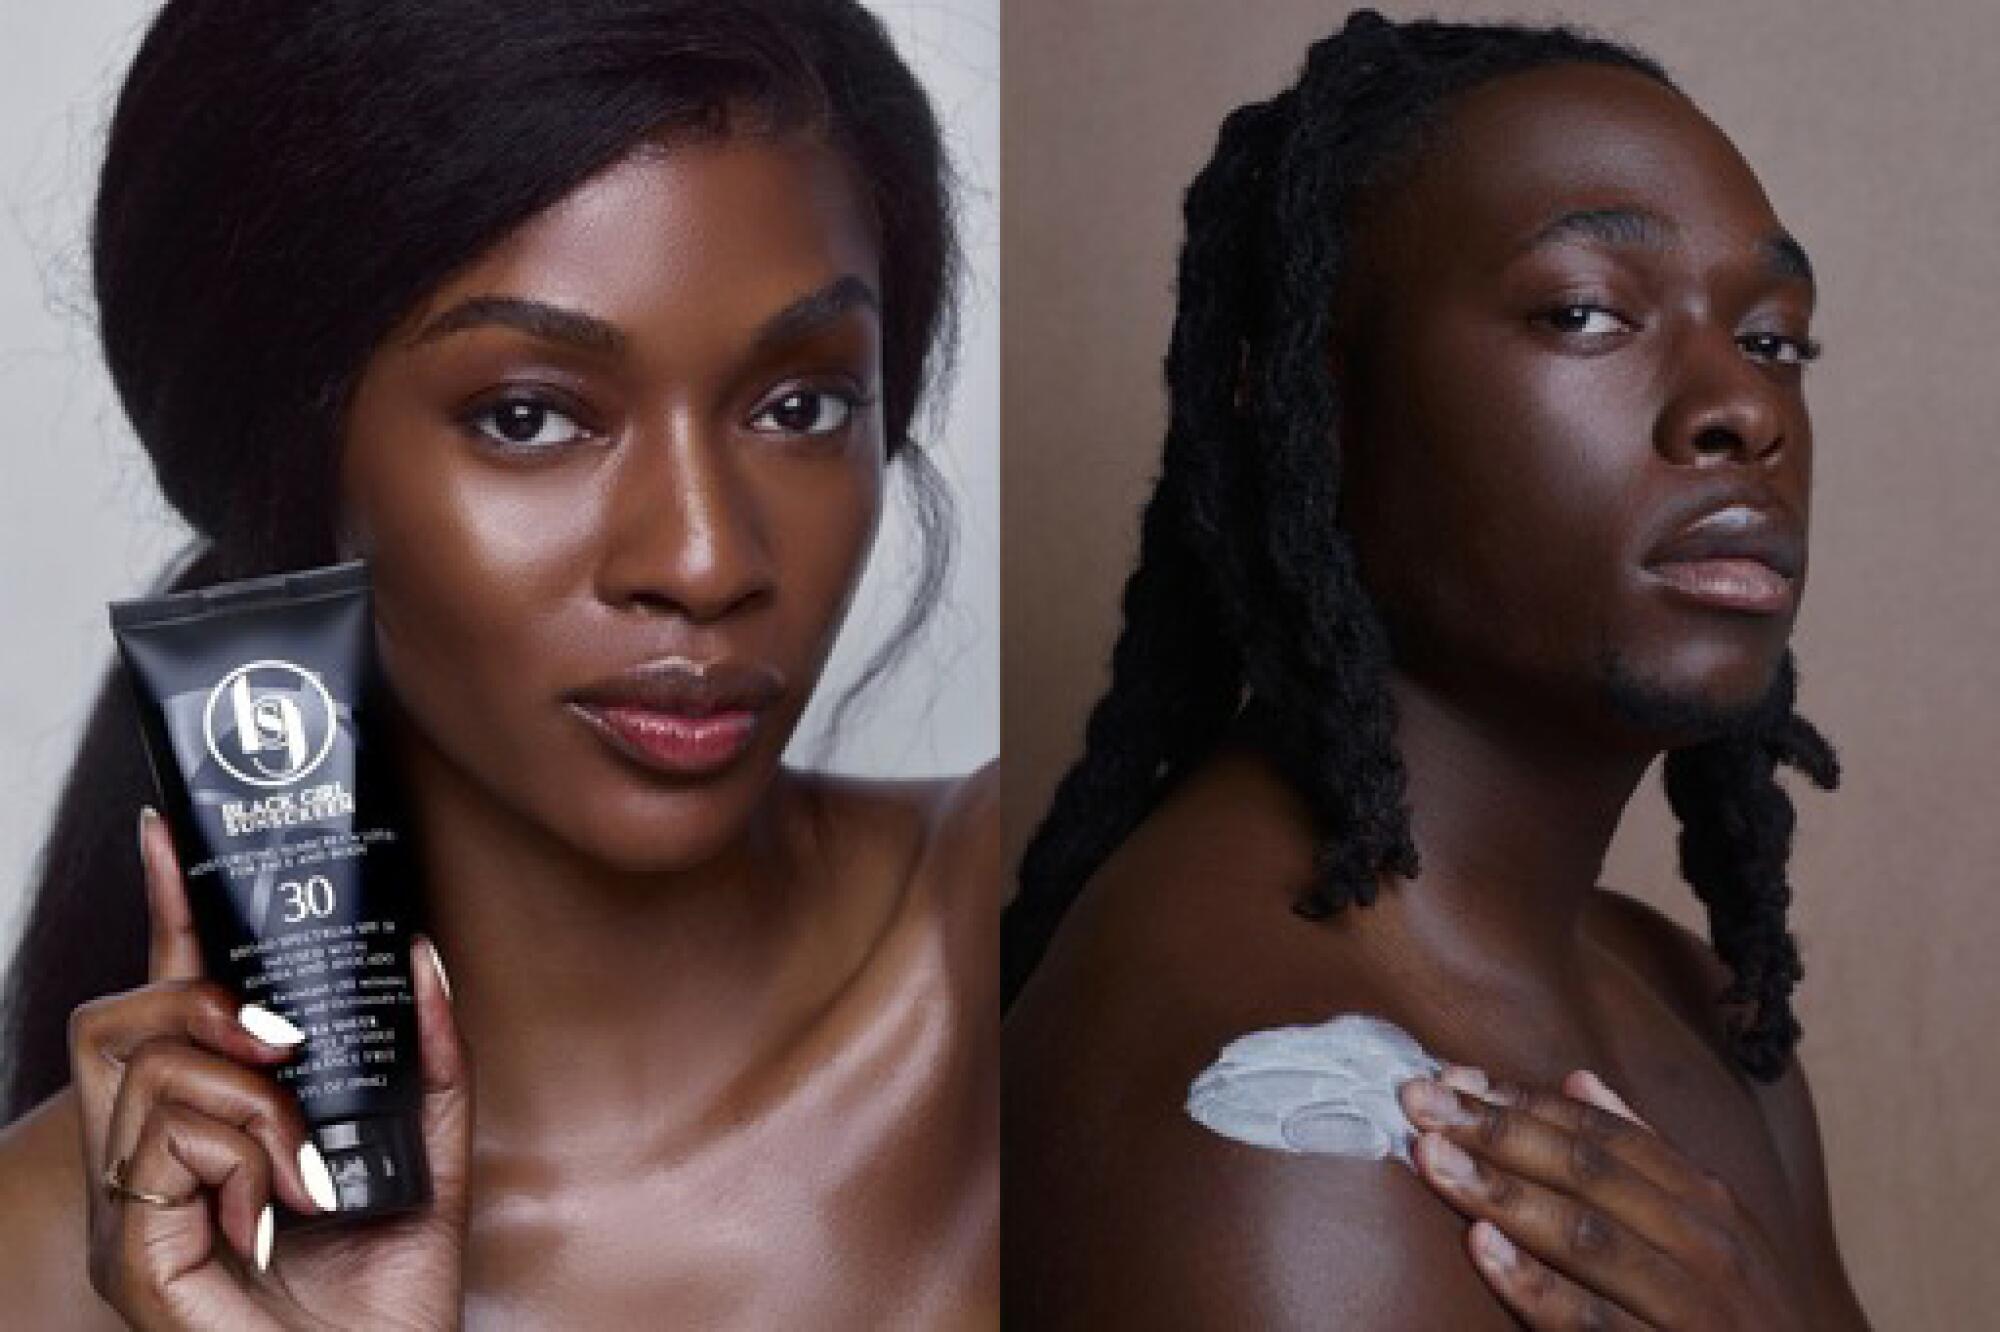 two Black models side-by-side, one holding a Black Girl Sunscreen bottle, the other with sunscreen swiped across the shoulder